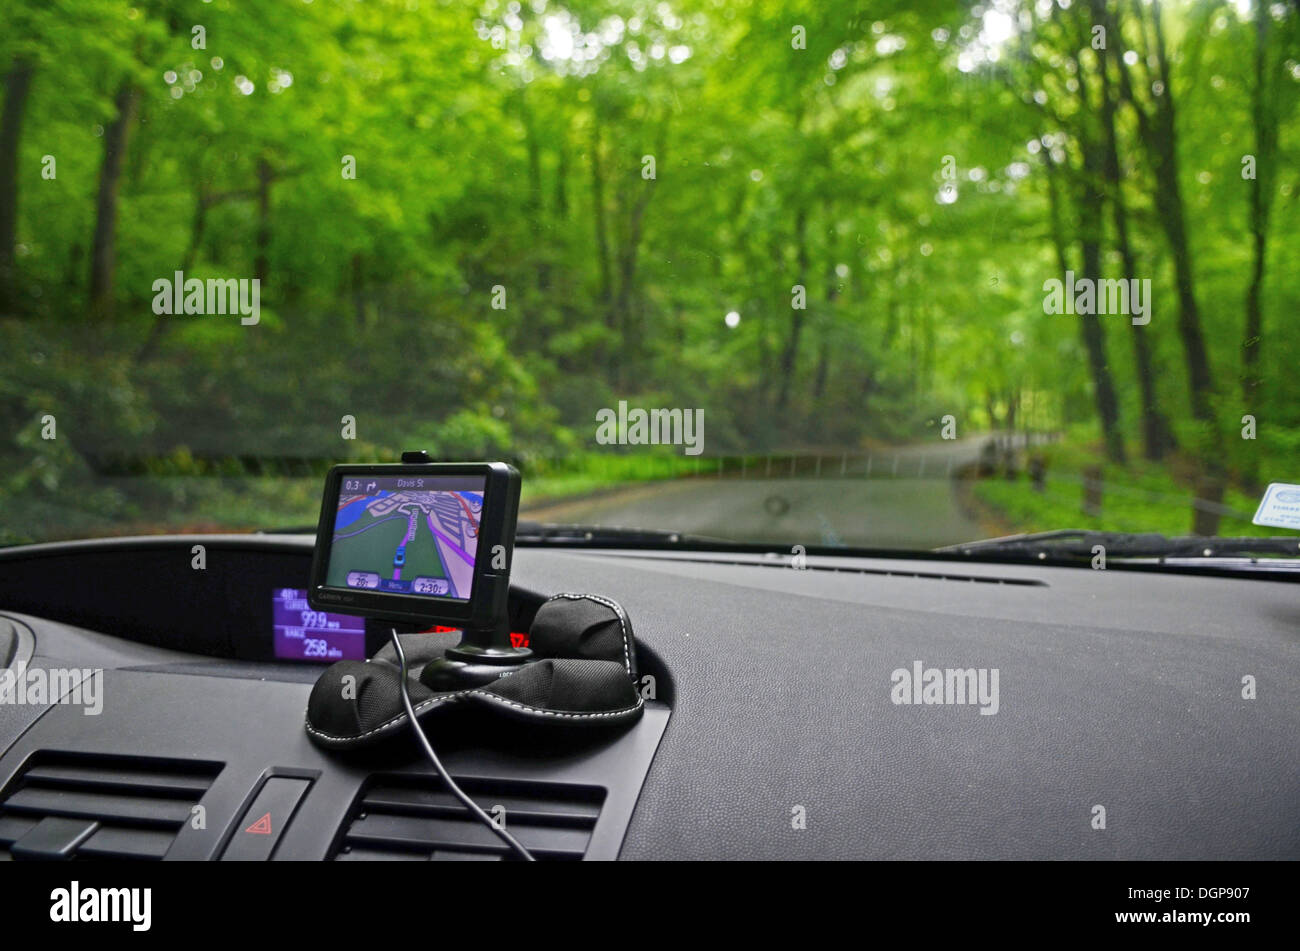 GPS device working inside a car Stock Photo